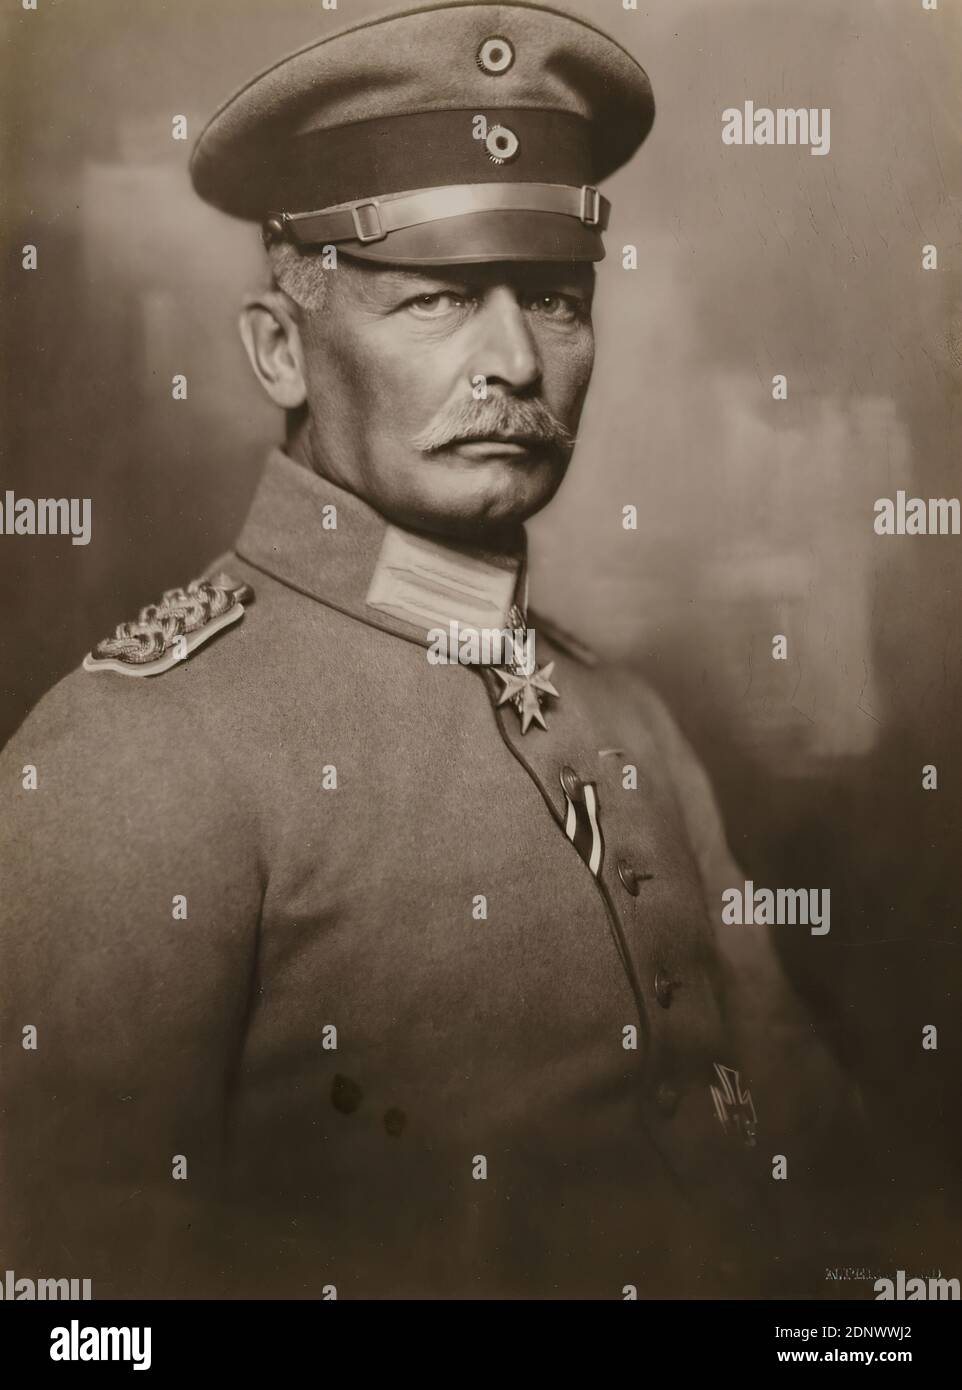 Nicola Perscheid, Erich von Falkenhayn - Prussian General, Staatliche Landesbildstelle Hamburg, collection on the history of photography, silver gelatin paper, black and white positive process, image size: height: 22.60 cm; width: 16.80 cm, inscribed: recto u. on the box: in brown ink: Erich von Falkenhayn - Prussian General, dry stamp: recto and right: N. Perscheid, portrait photography, studio photography/studio photography, bust, three-quarter view, uniforms (military), historical person, warfare/military Stock Photo